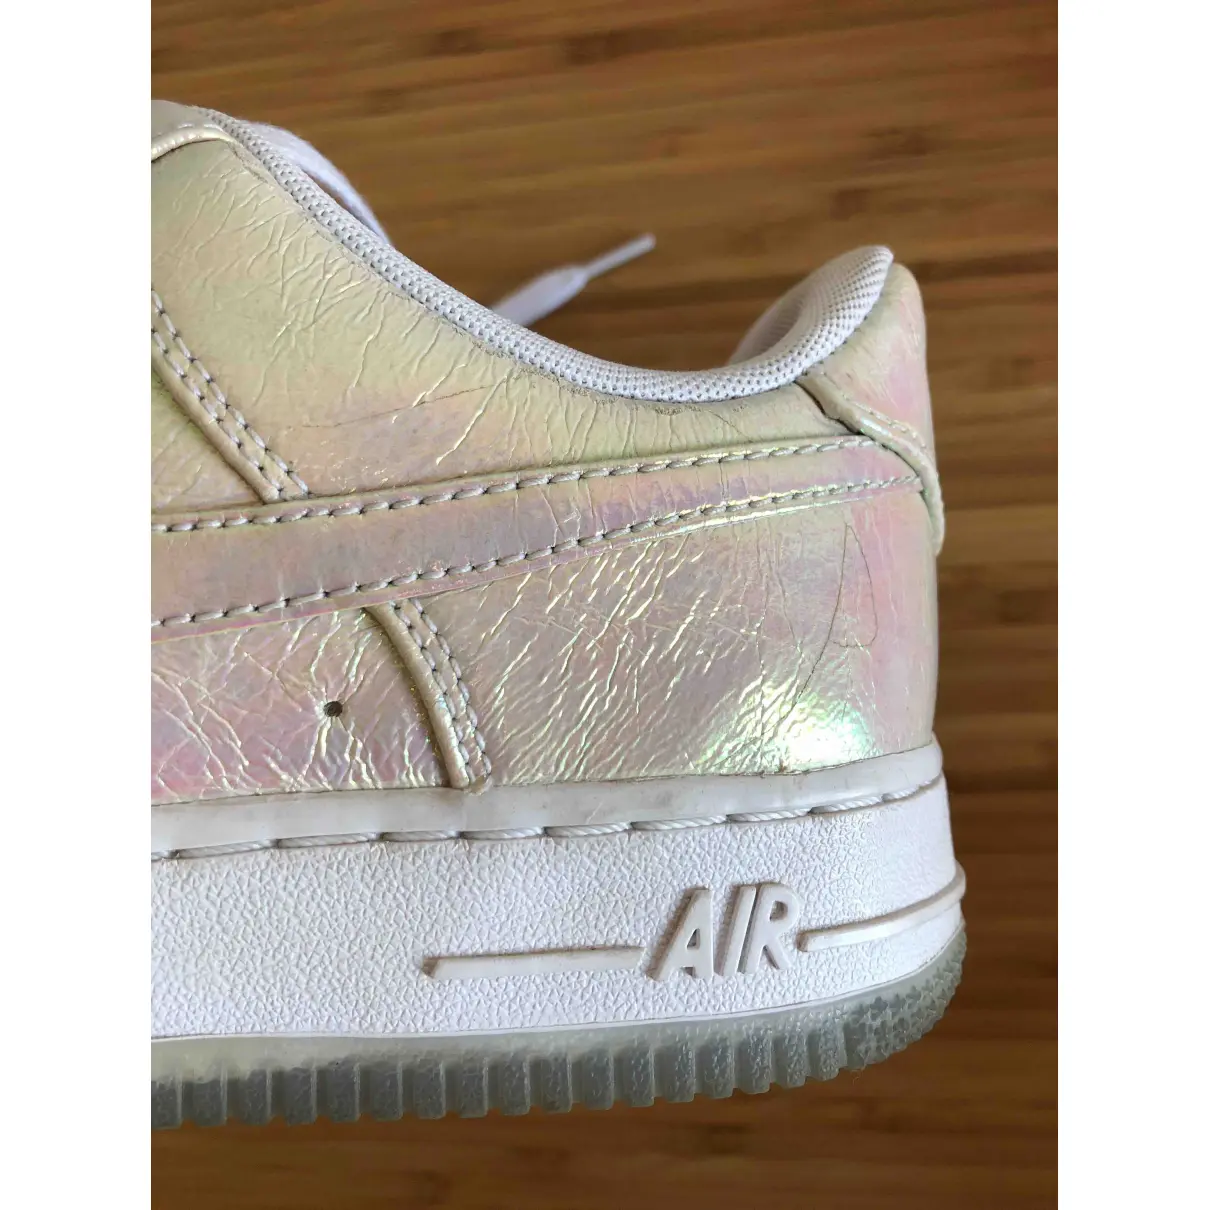 Air Force 1 leather trainers Nike